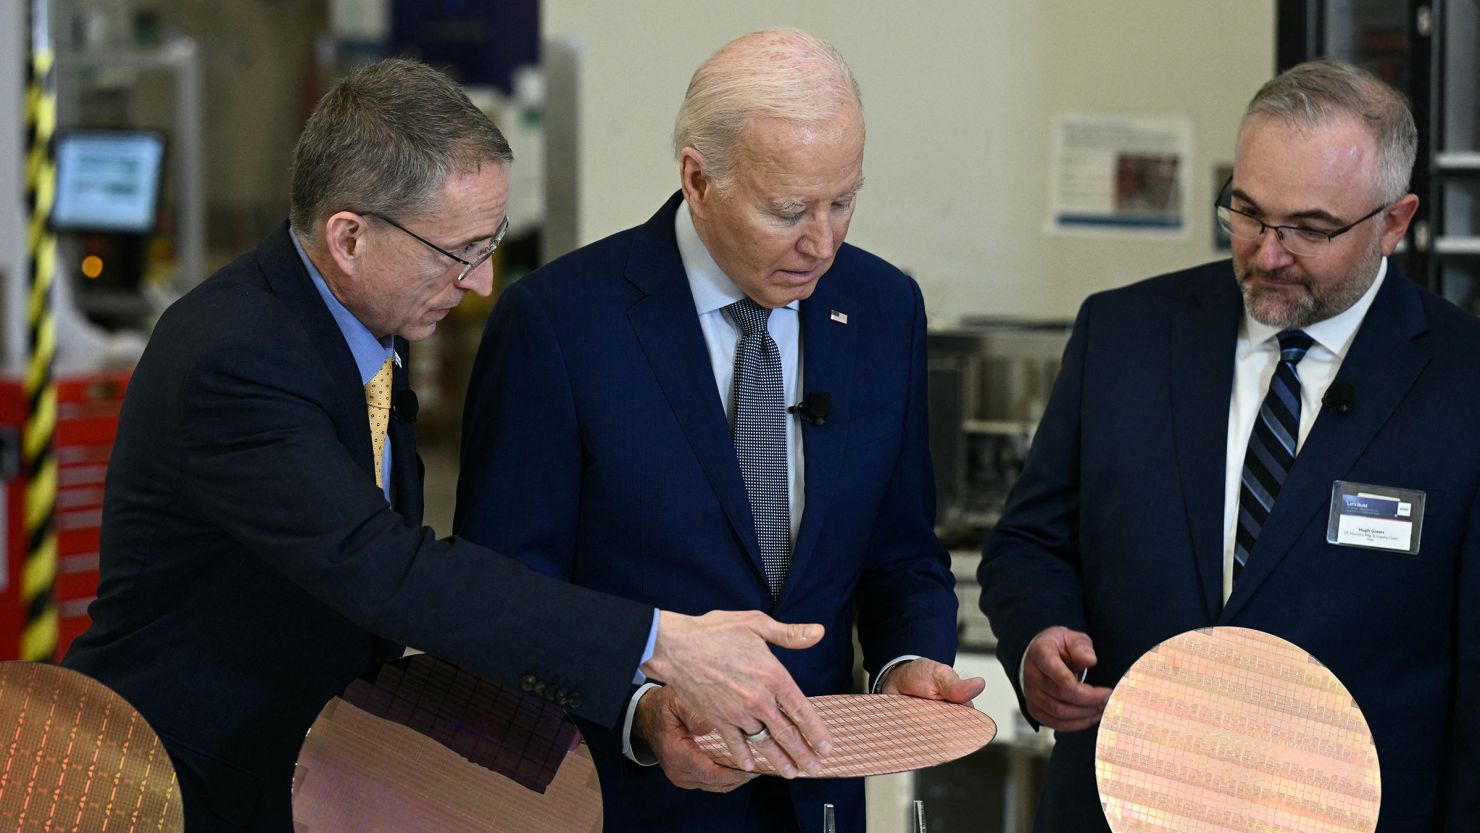 President Joe Biden, center, stands behind a table, next to Intel's CEO Pat Gelsinger, left, as they look at wafers of chips while touring the Intel Ocotillo Campus in Chandler, Arizona, on March 20.